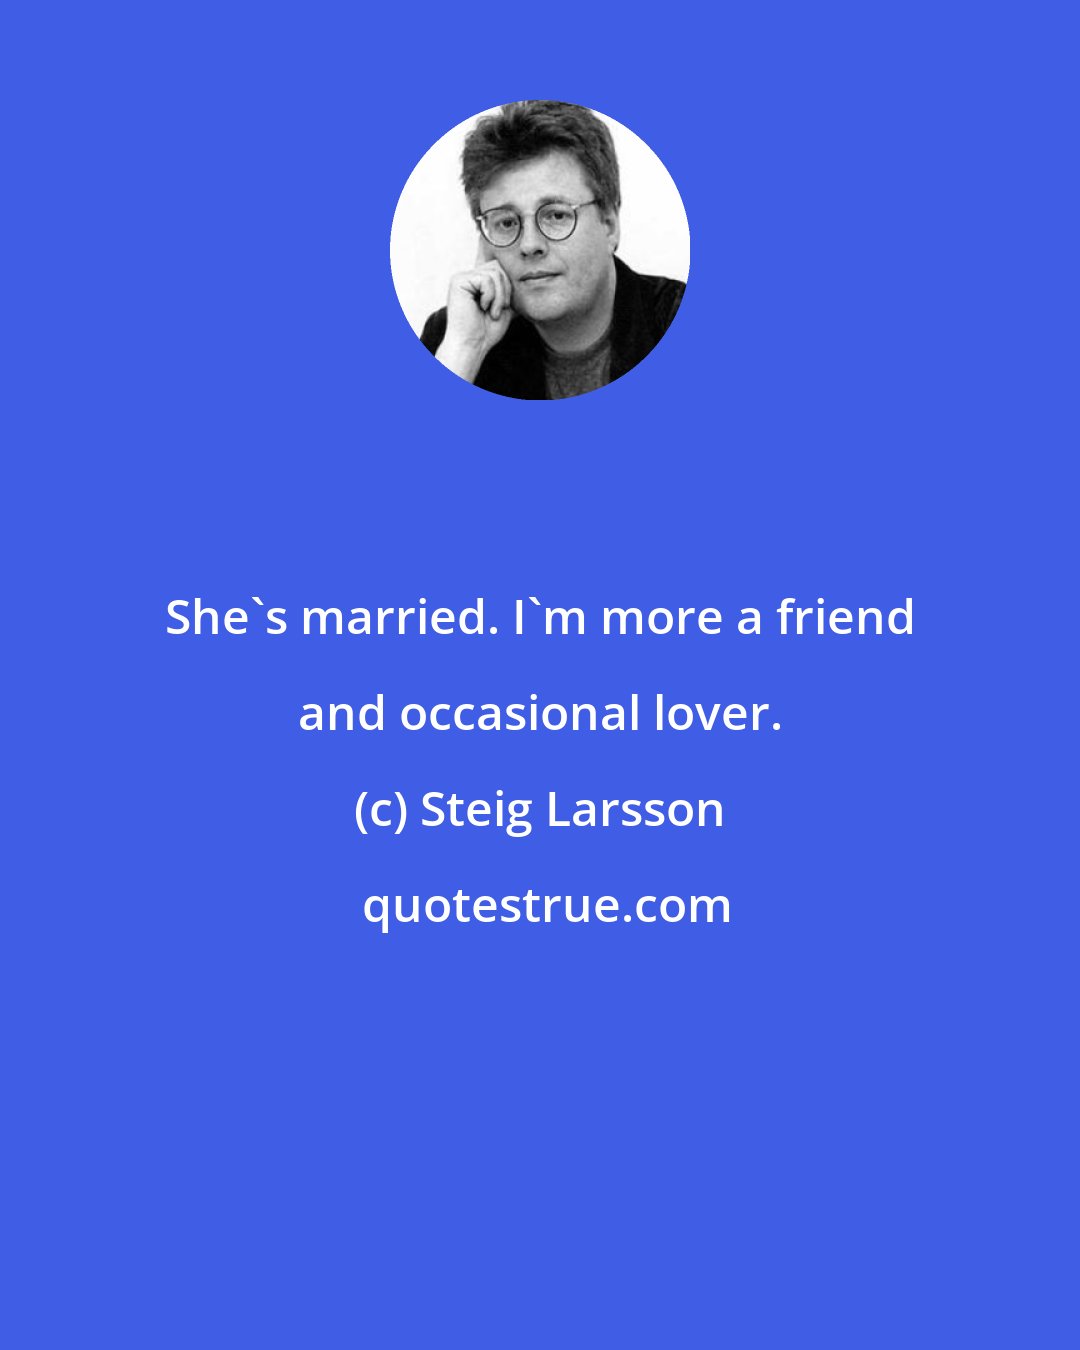 Steig Larsson: She's married. I'm more a friend and occasional lover.